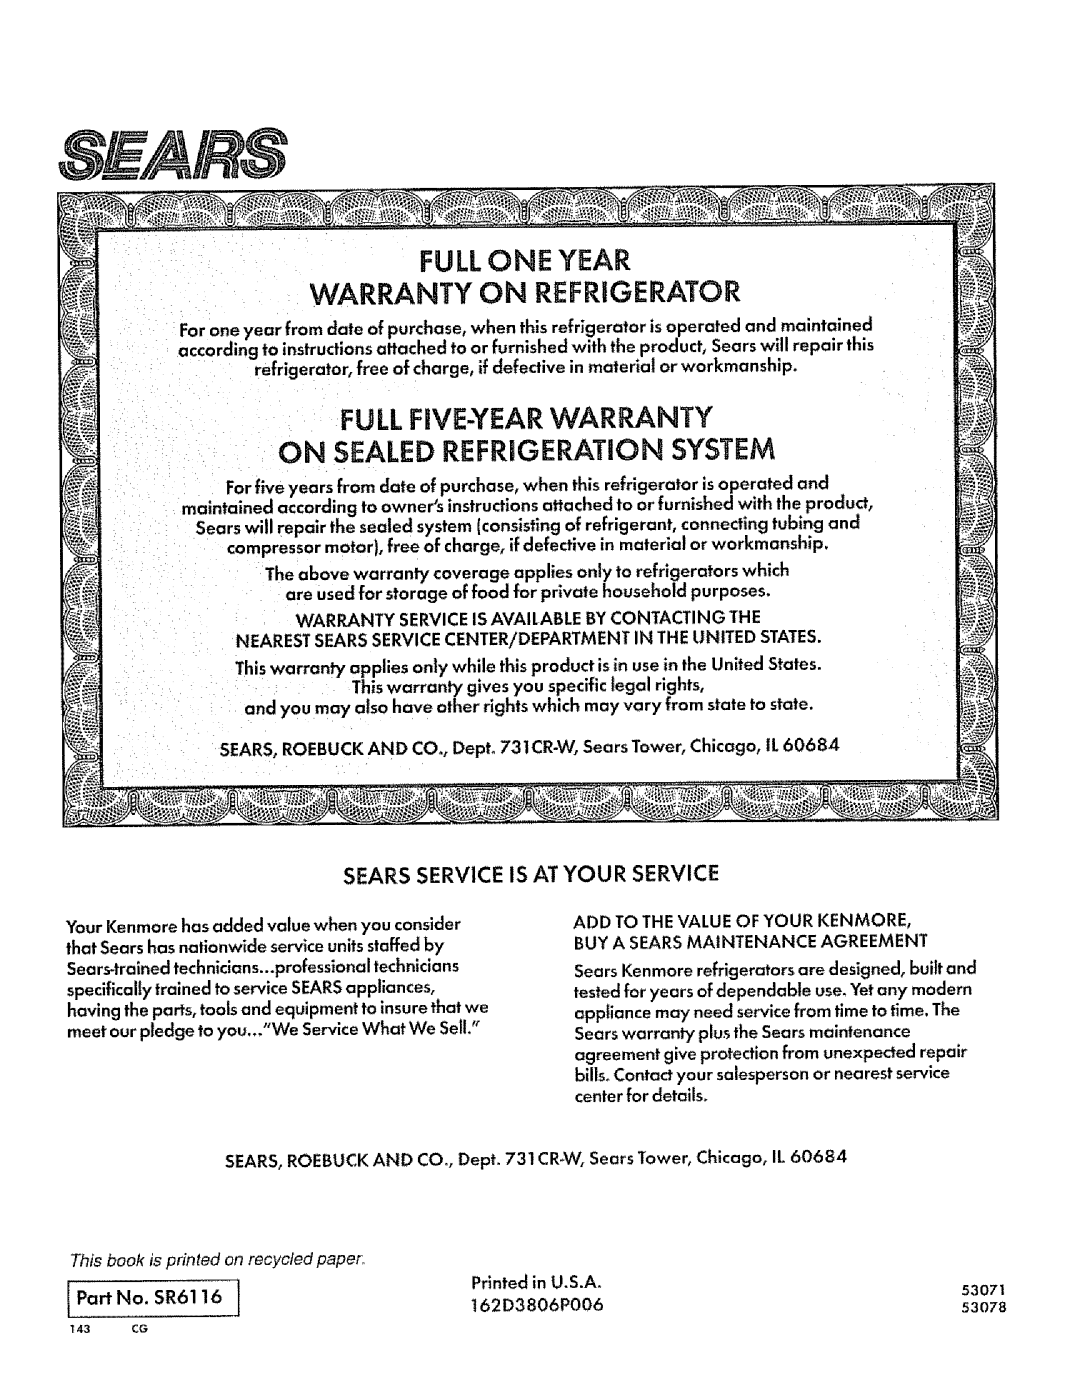 Sears 53078 manual Sears Service Is At Your Service, WARRANTY SERVICE IS AVAItABLE BY CONTACTING THE, SR6116, Full One Year 